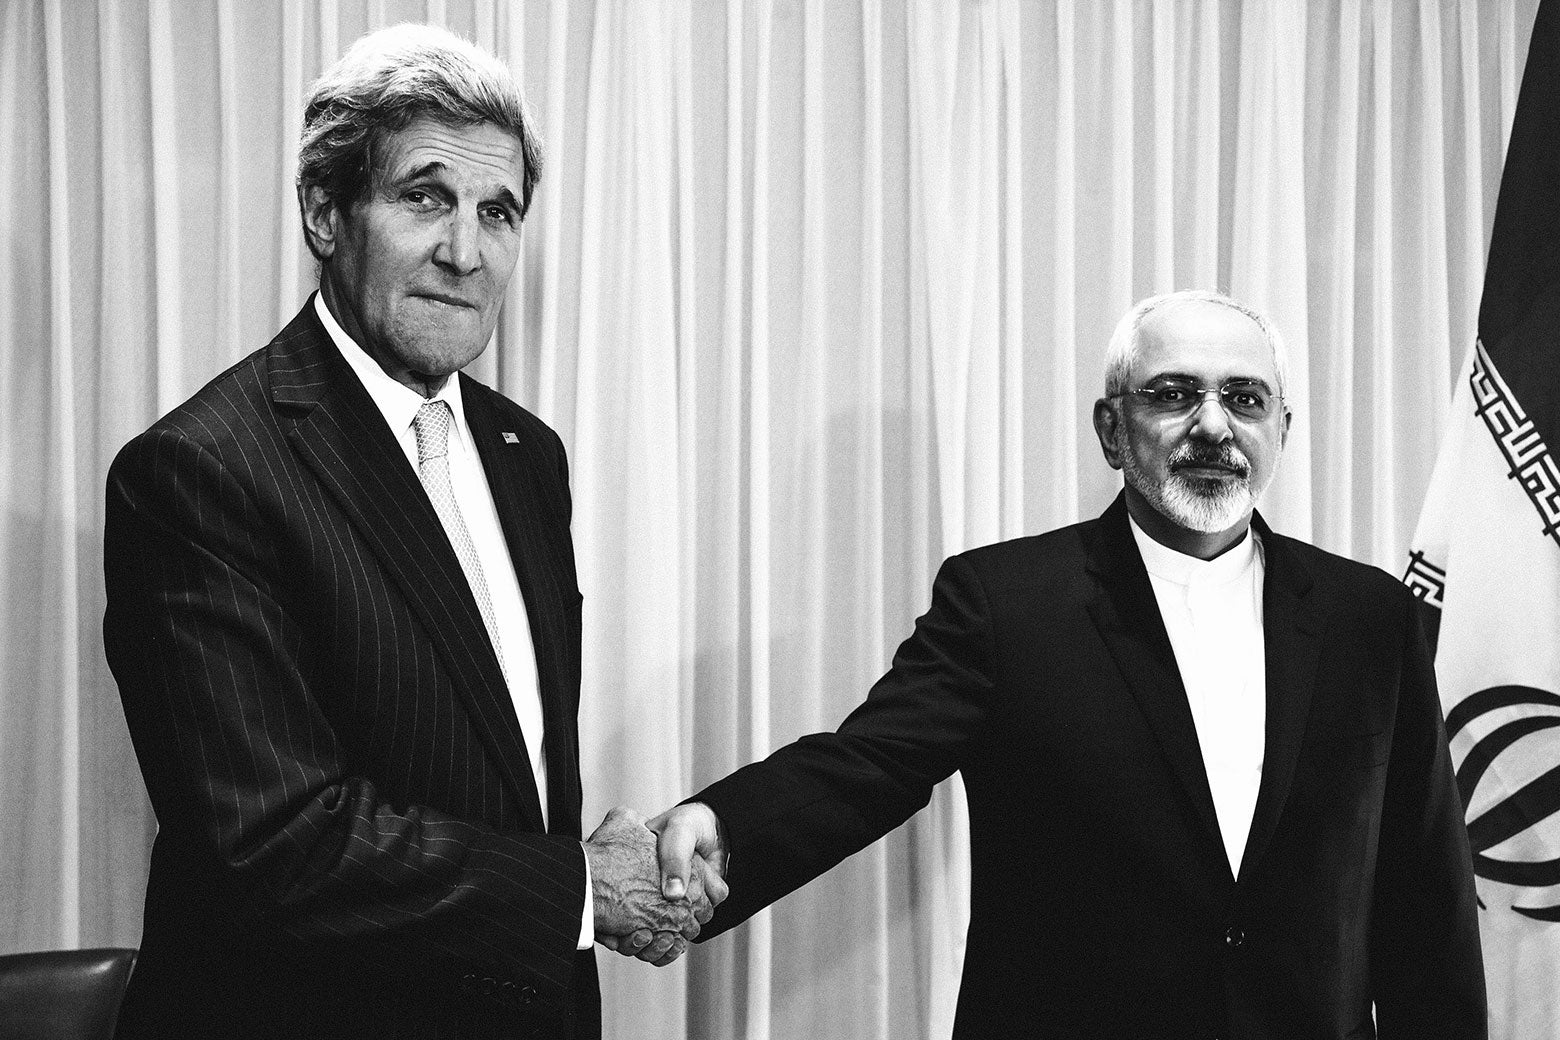 Iranian Foreign Minister Mohammad Javad Zarif shakes hands with U.S. Secretary of State John Kerry in Geneva on Jan. 14, 2015.